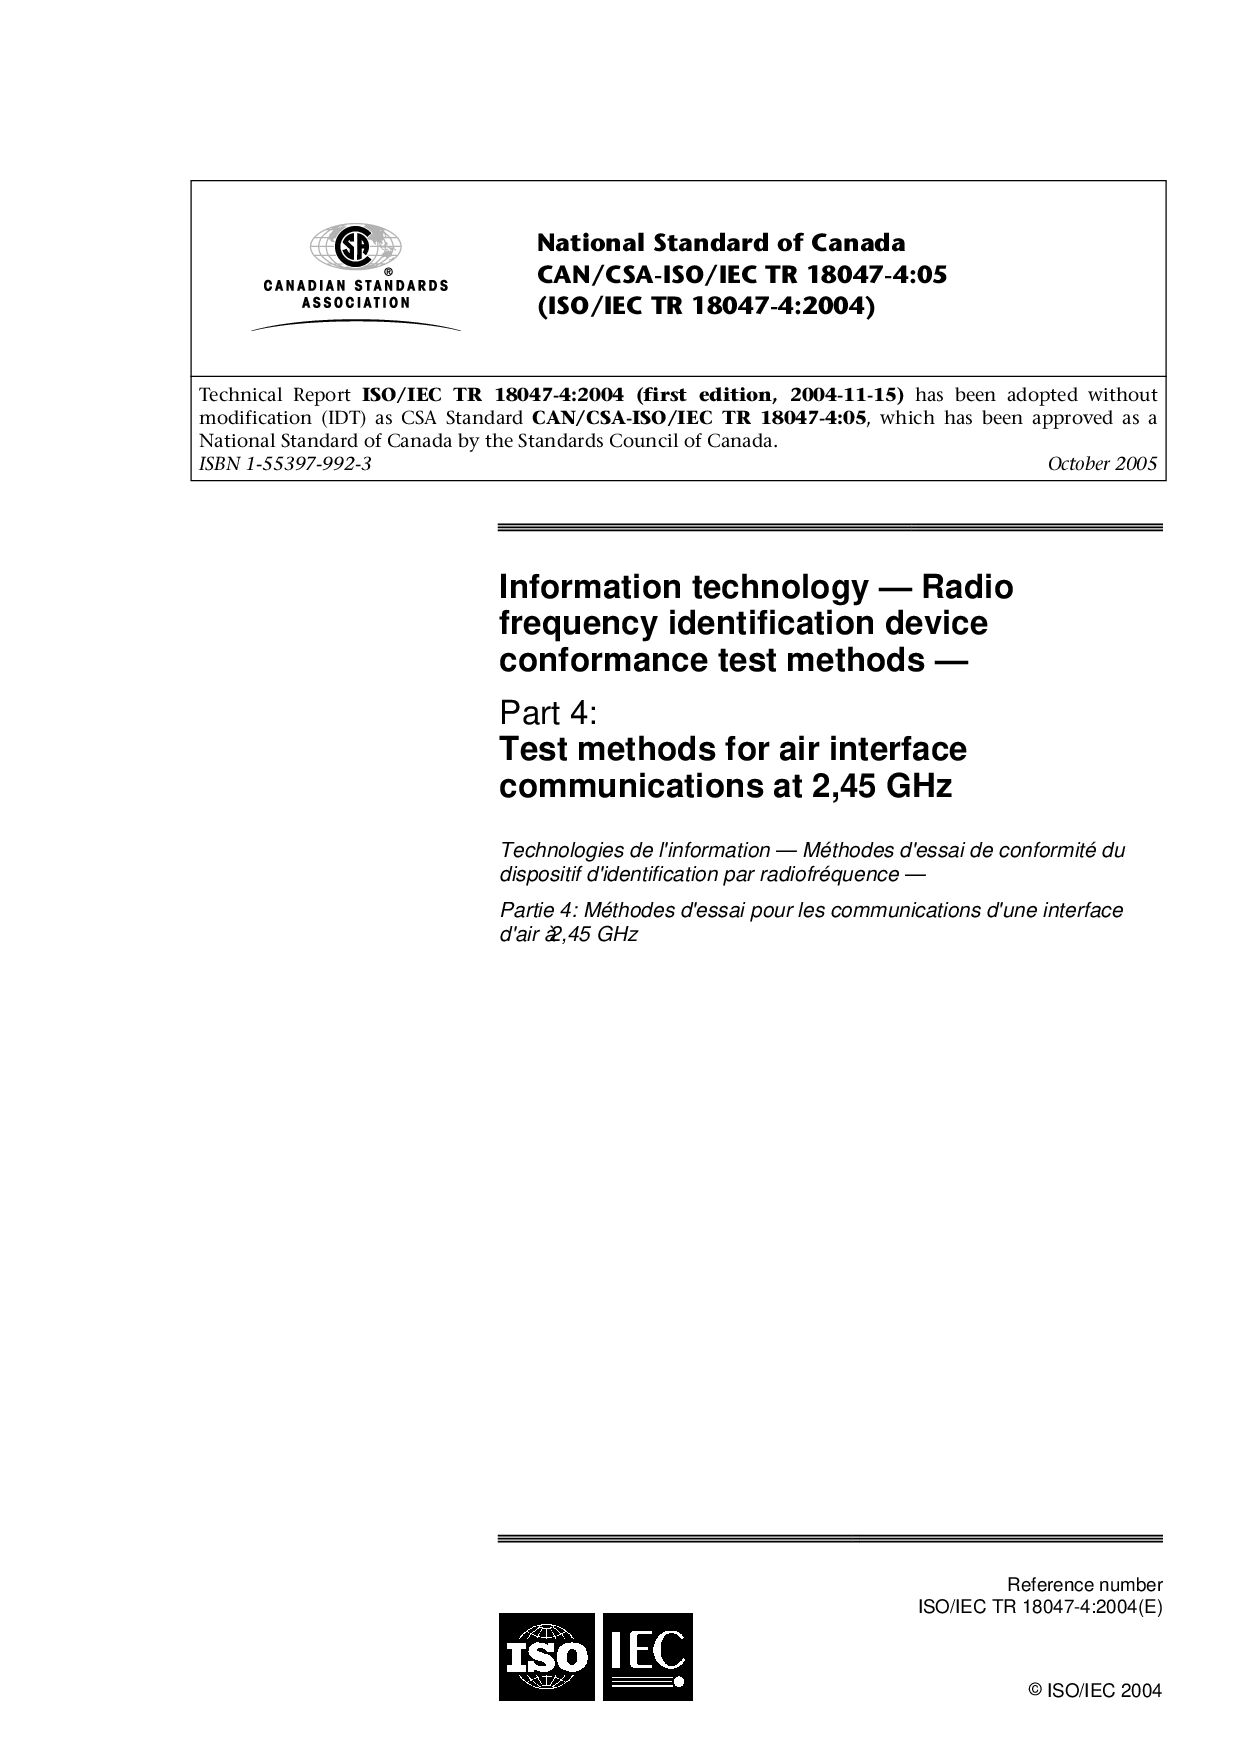 CAN/CSA-ISO/IEC TR 18047-4:2005